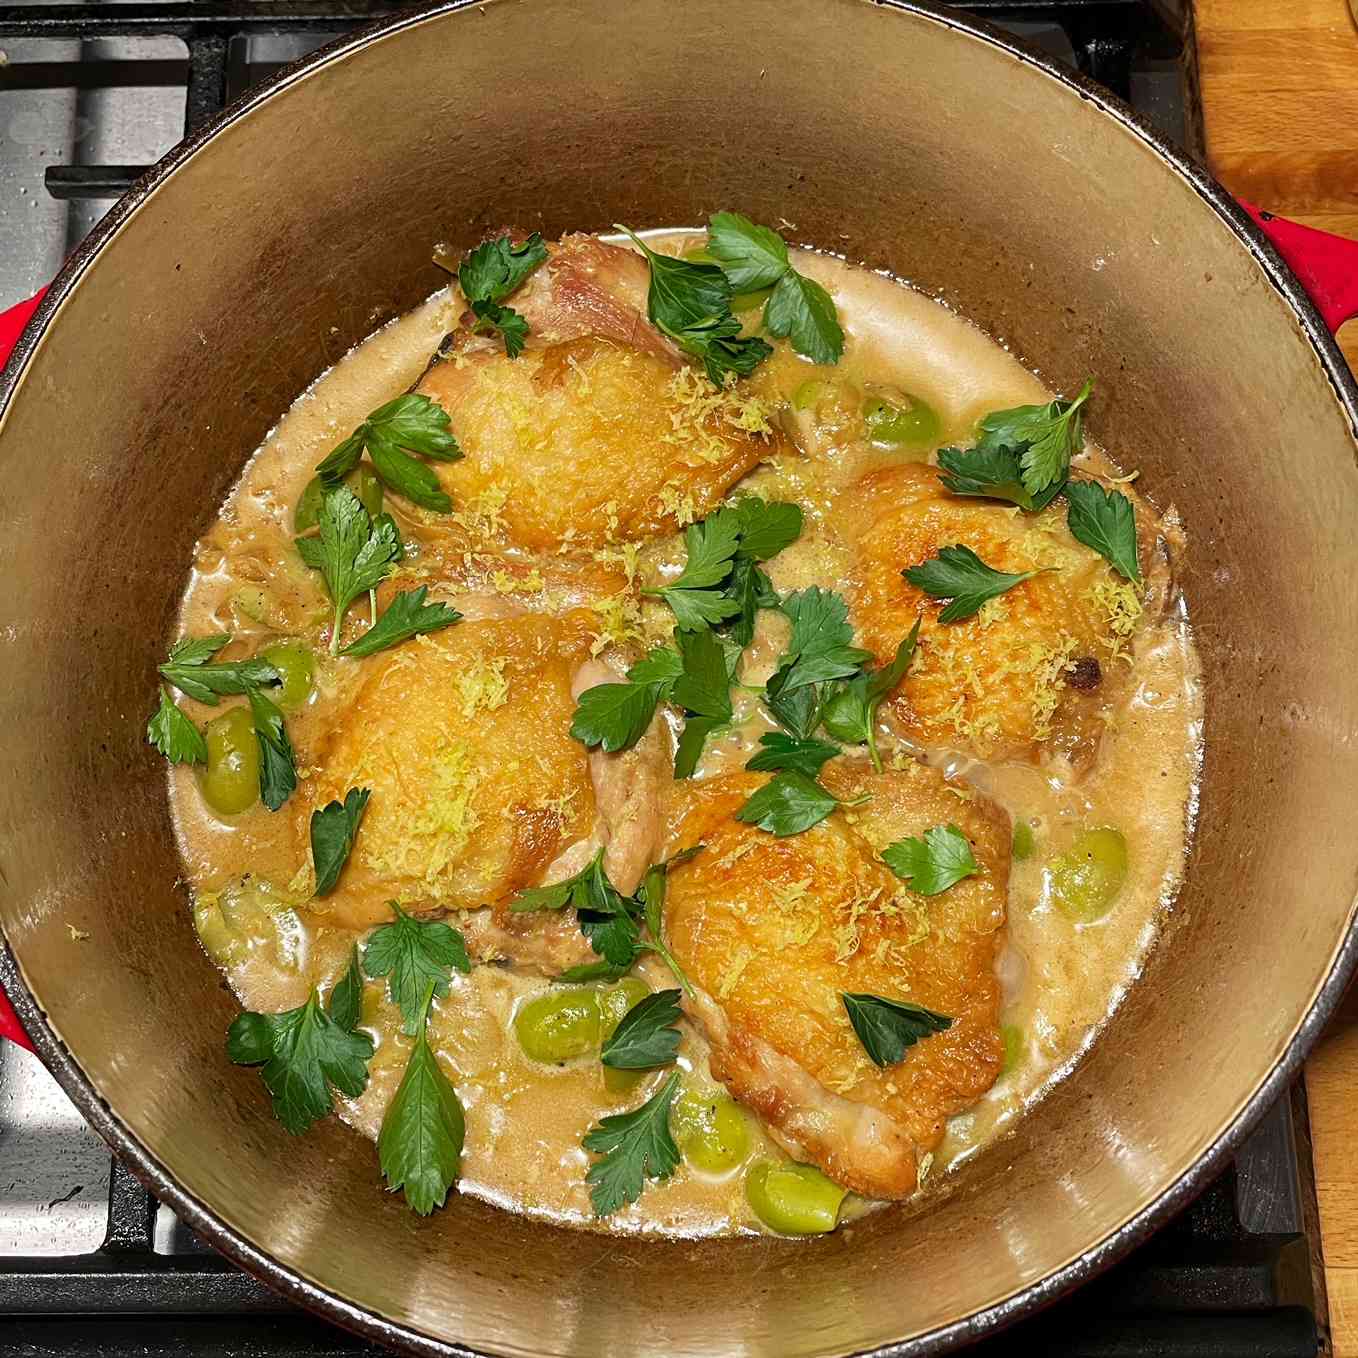 Four browned skin-on chicken thighs in a creamy sauce with green olives; garnished with lemon zest and whole parsley leaves